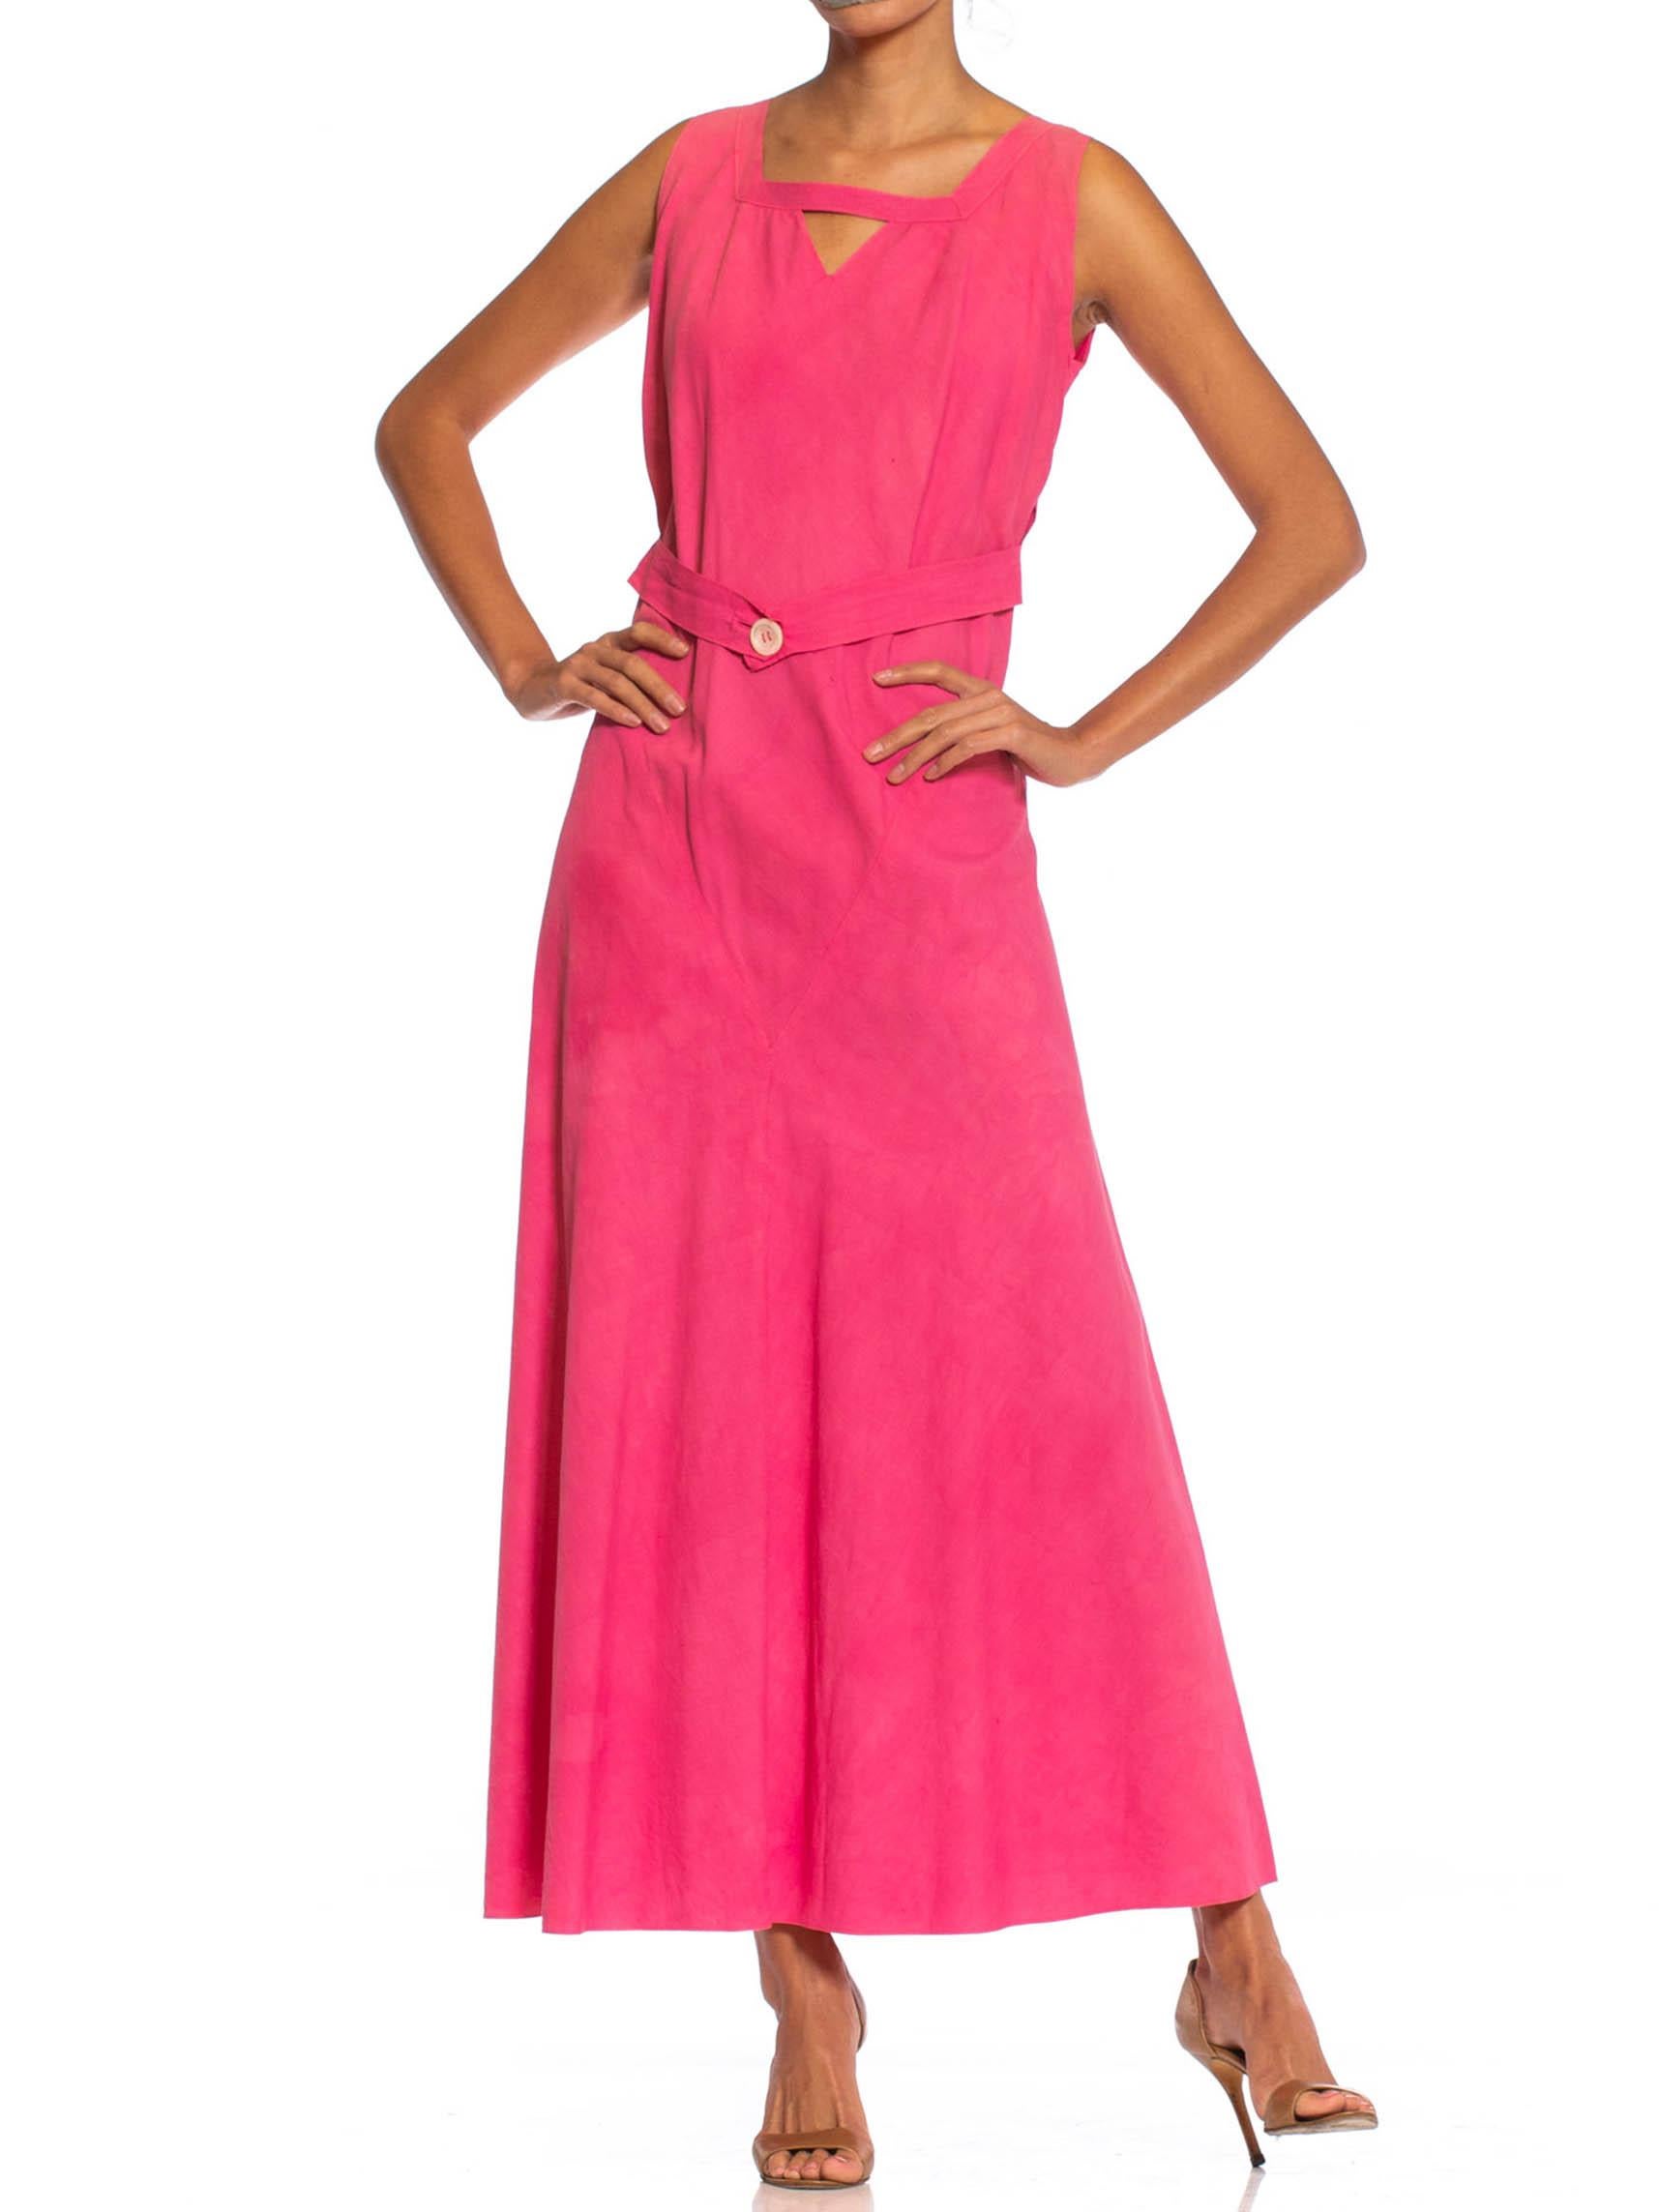 Women's 1930S Pink Bias Cut Cotton Ottoman Dress With Out Back For Sale